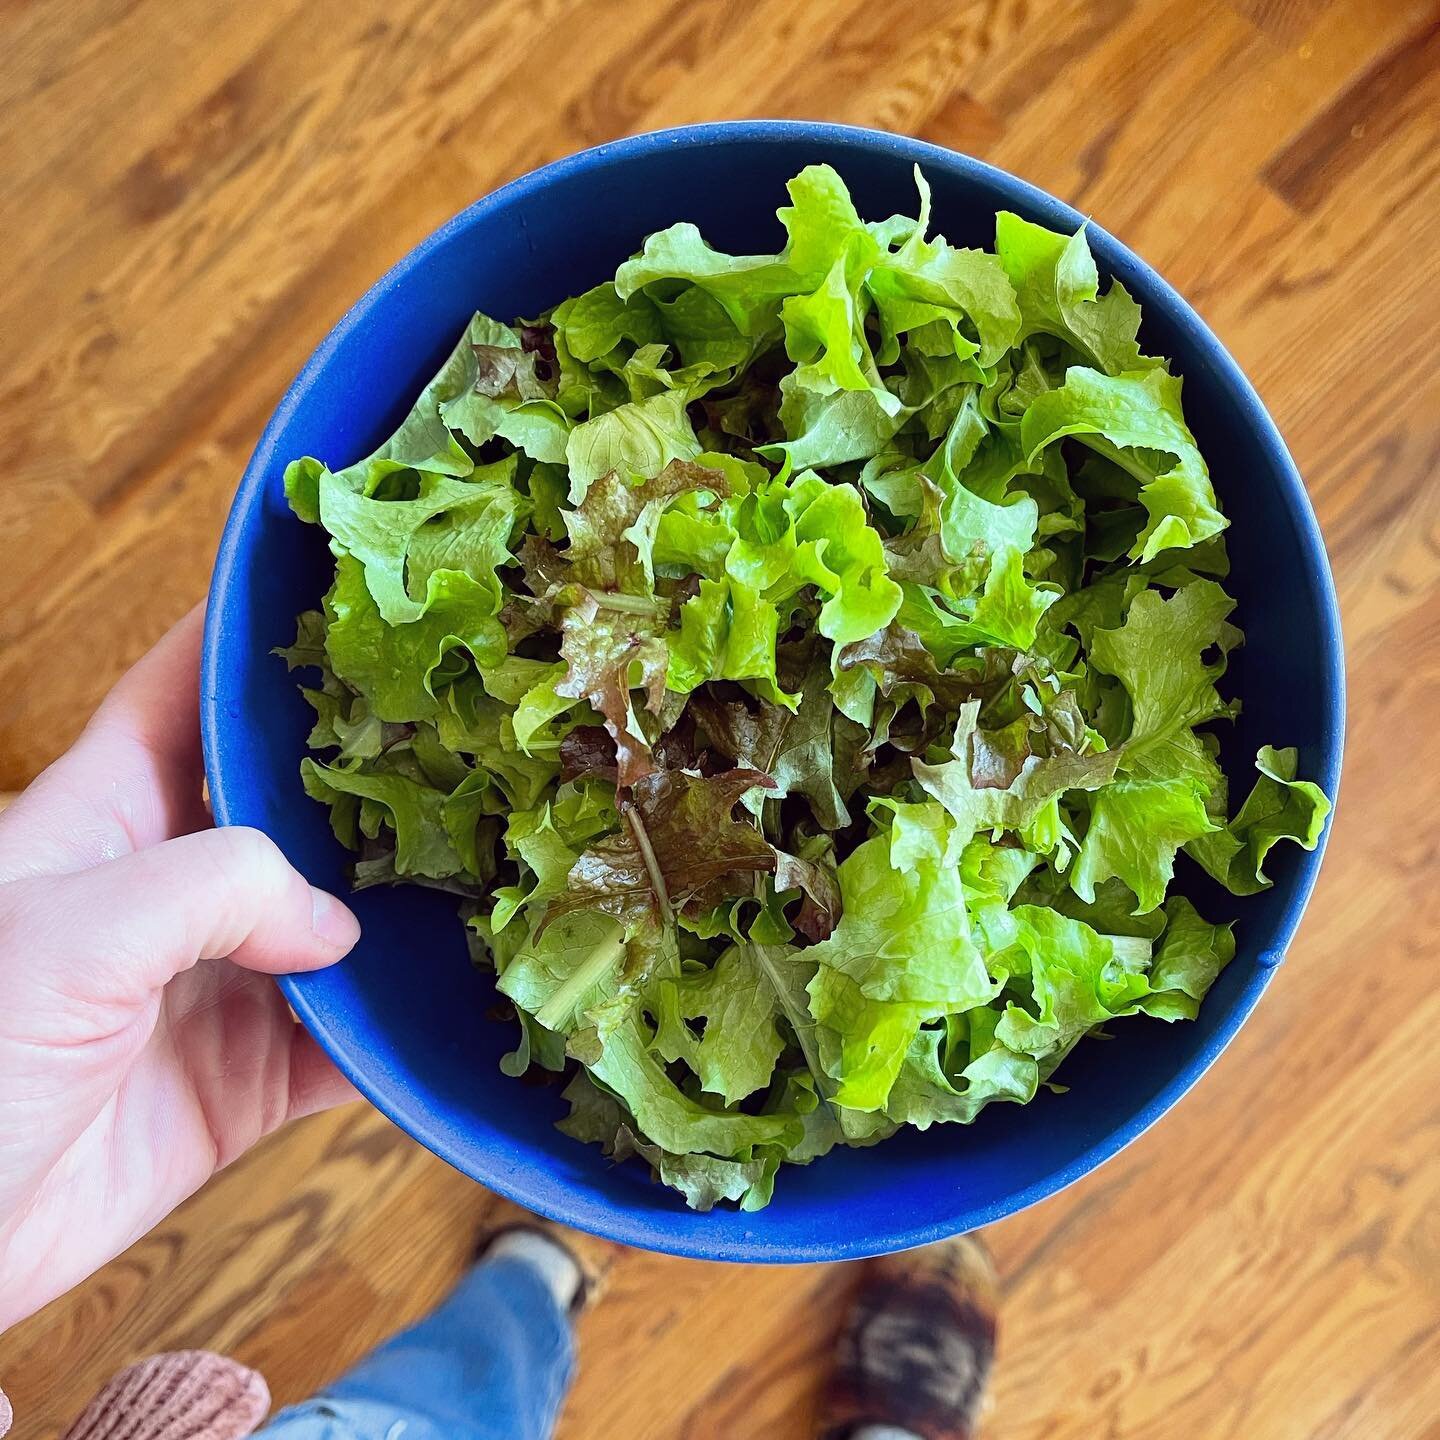 Feeling very of the earth today eating a salad with lettuce grown in my backyard 🥬 #joyspotting